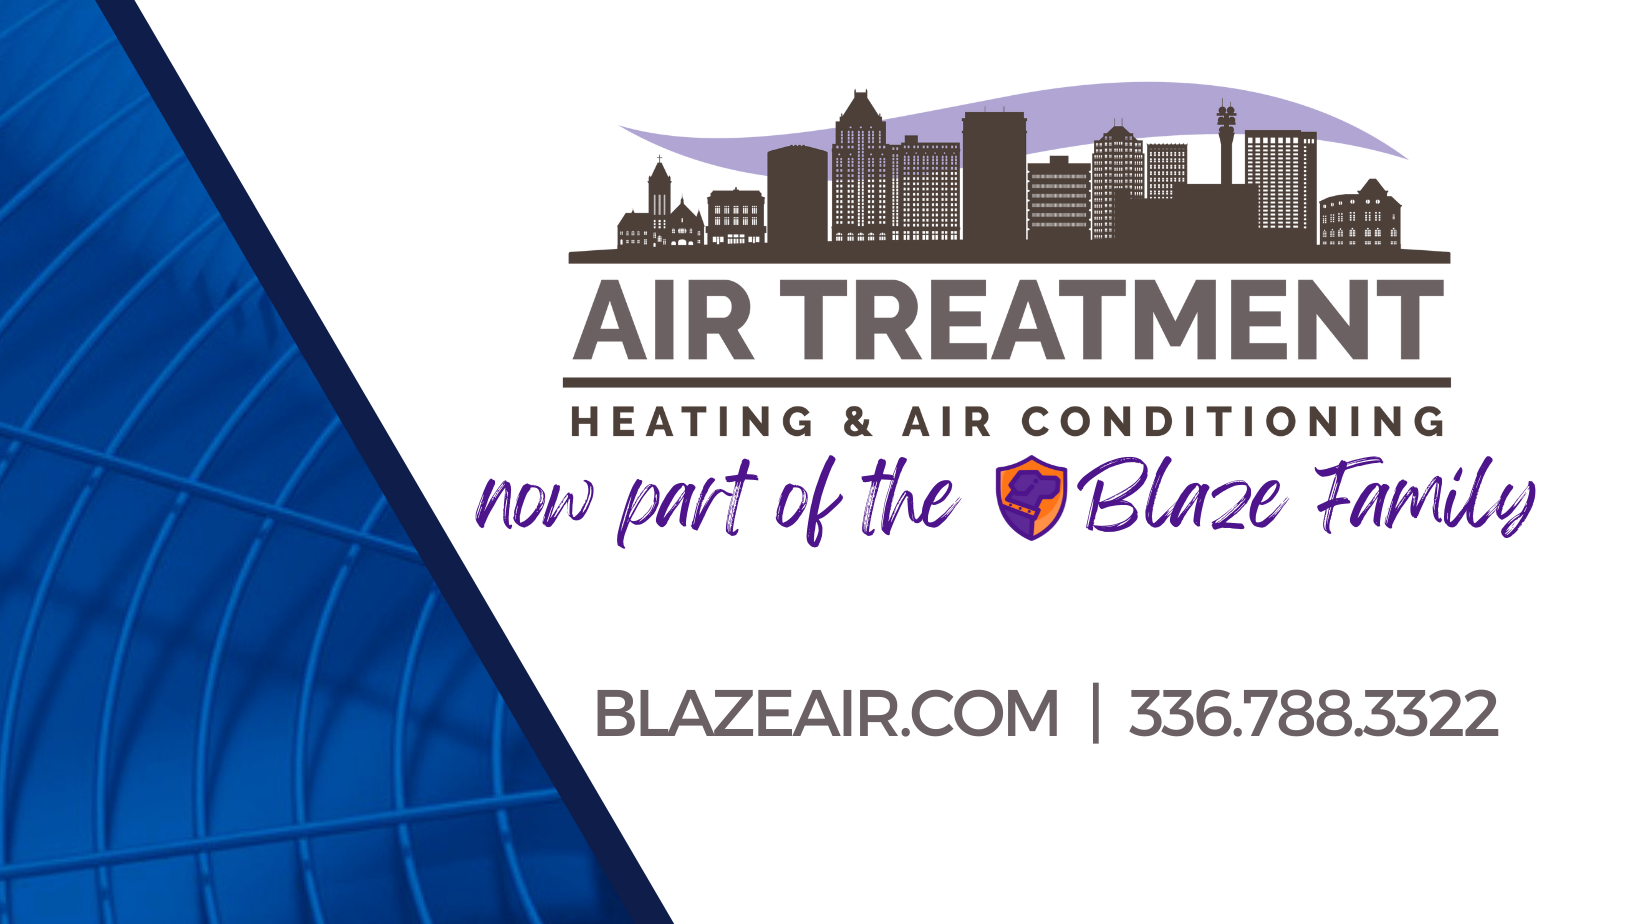 Air Treatment Inc. is Now Part of the Blaze Family – Serving Greensboro, NC